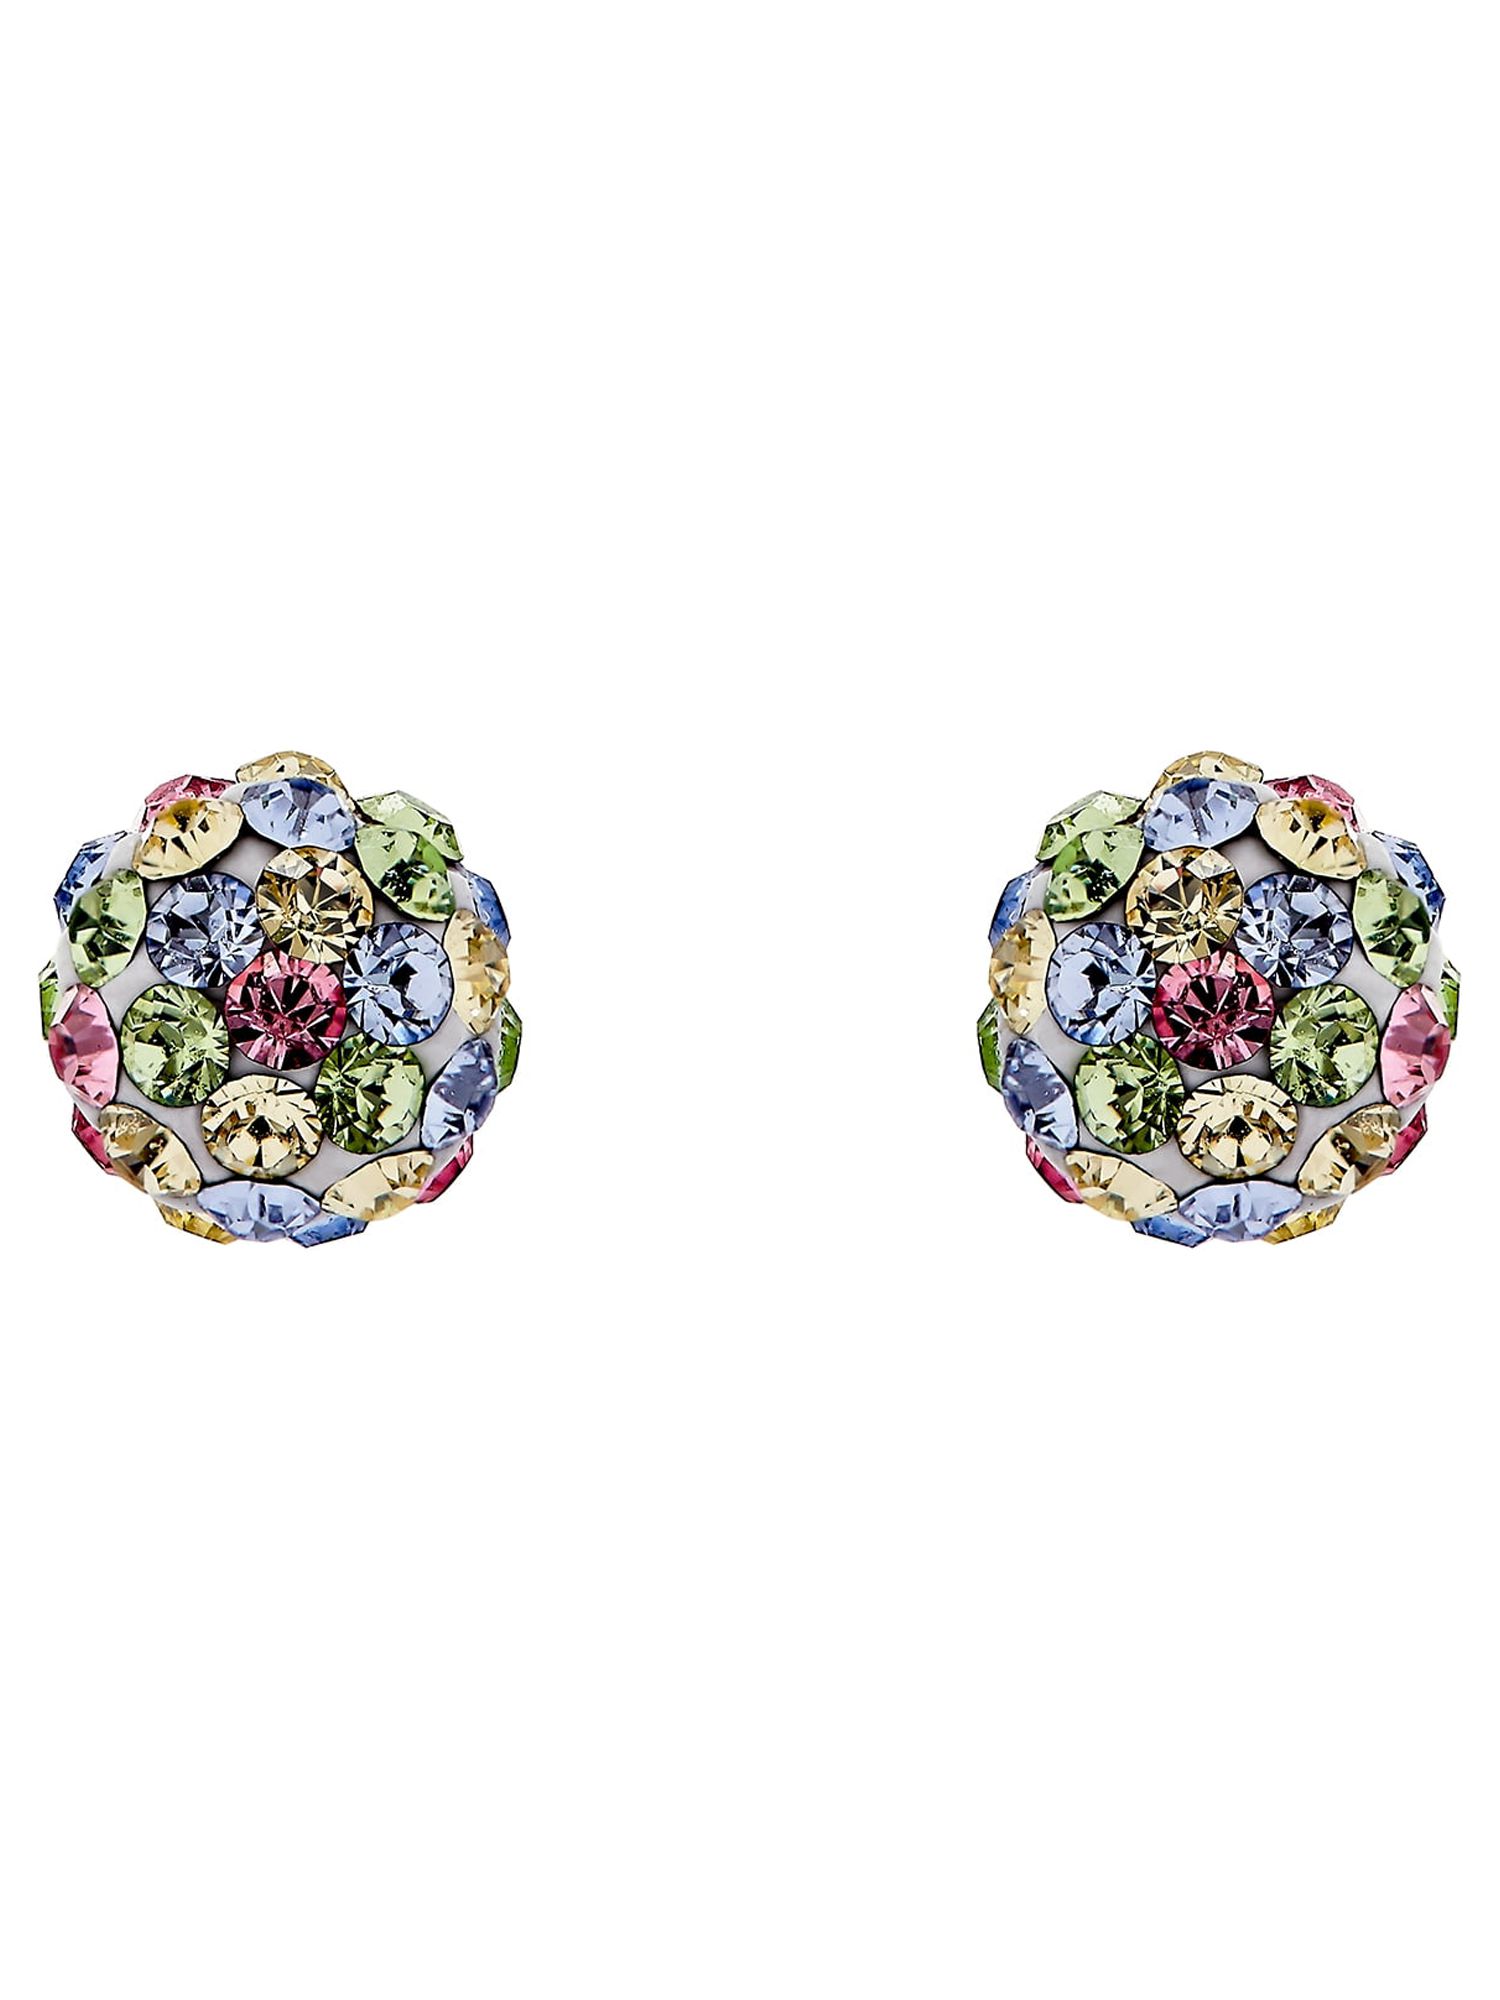 Brilliance Fine Jewelry Girls' Pastel Crystals 4.8MM Ball Earrings in 10K Yellow Gold - image 2 of 4